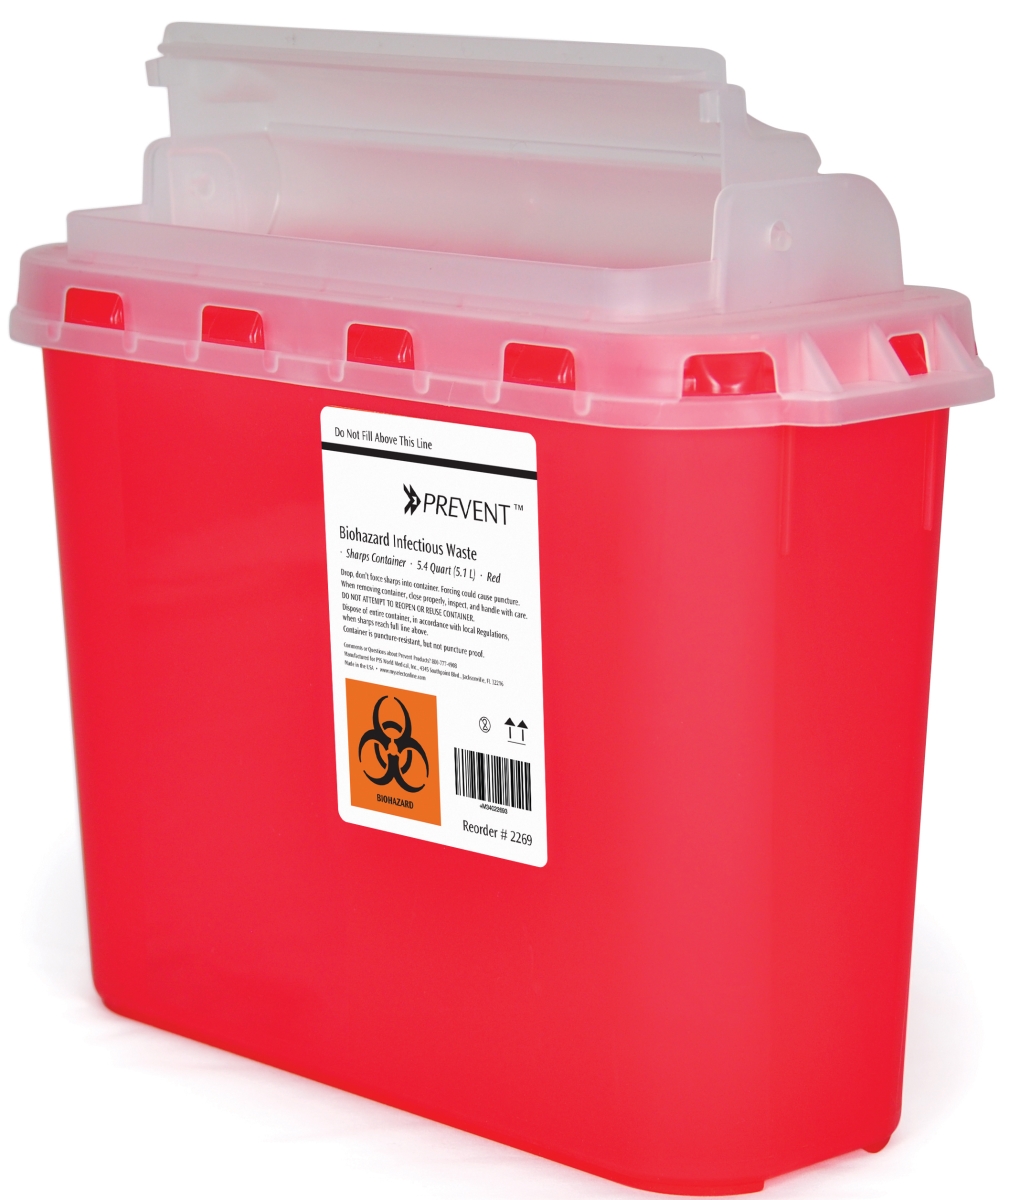 Picture of McKesson 60492800 5.4 qt. Prevent Sharps Container&#44; Red - 11 x 12 x 4.75 in. - 2 Piece